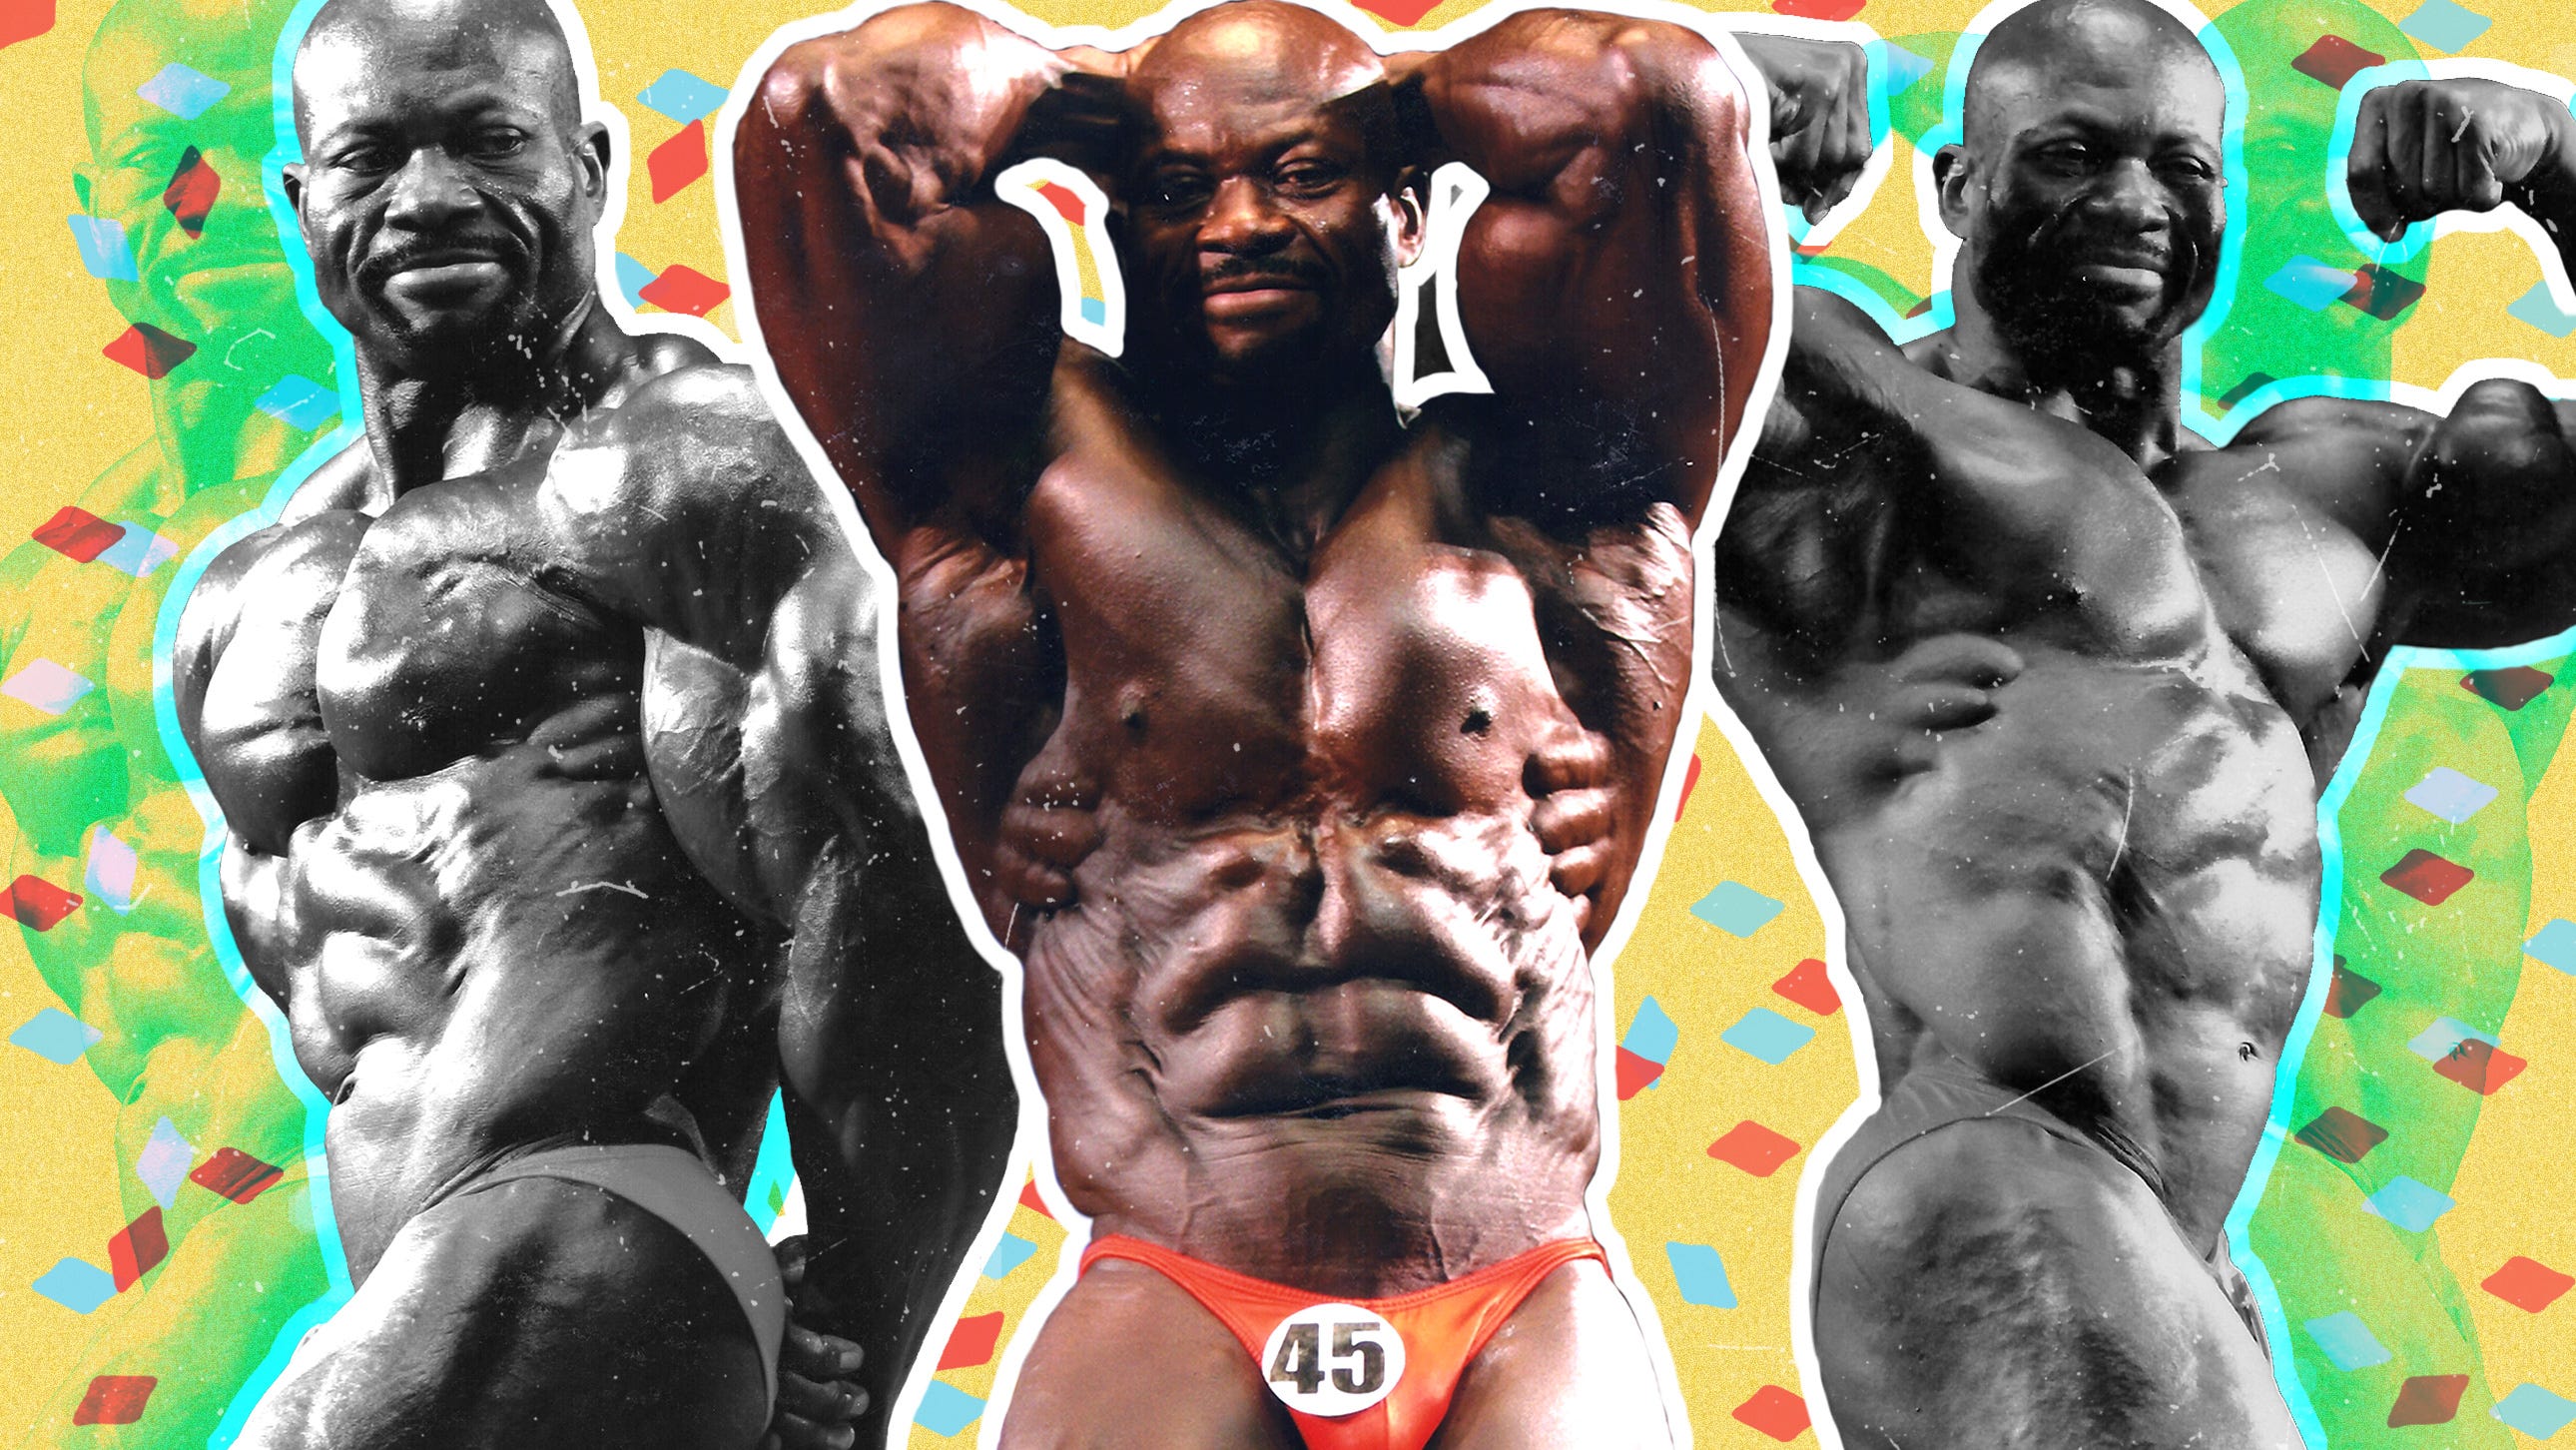 Ronnie Coleman Shares His Greatest Bodybuilding Poses Of All-Time